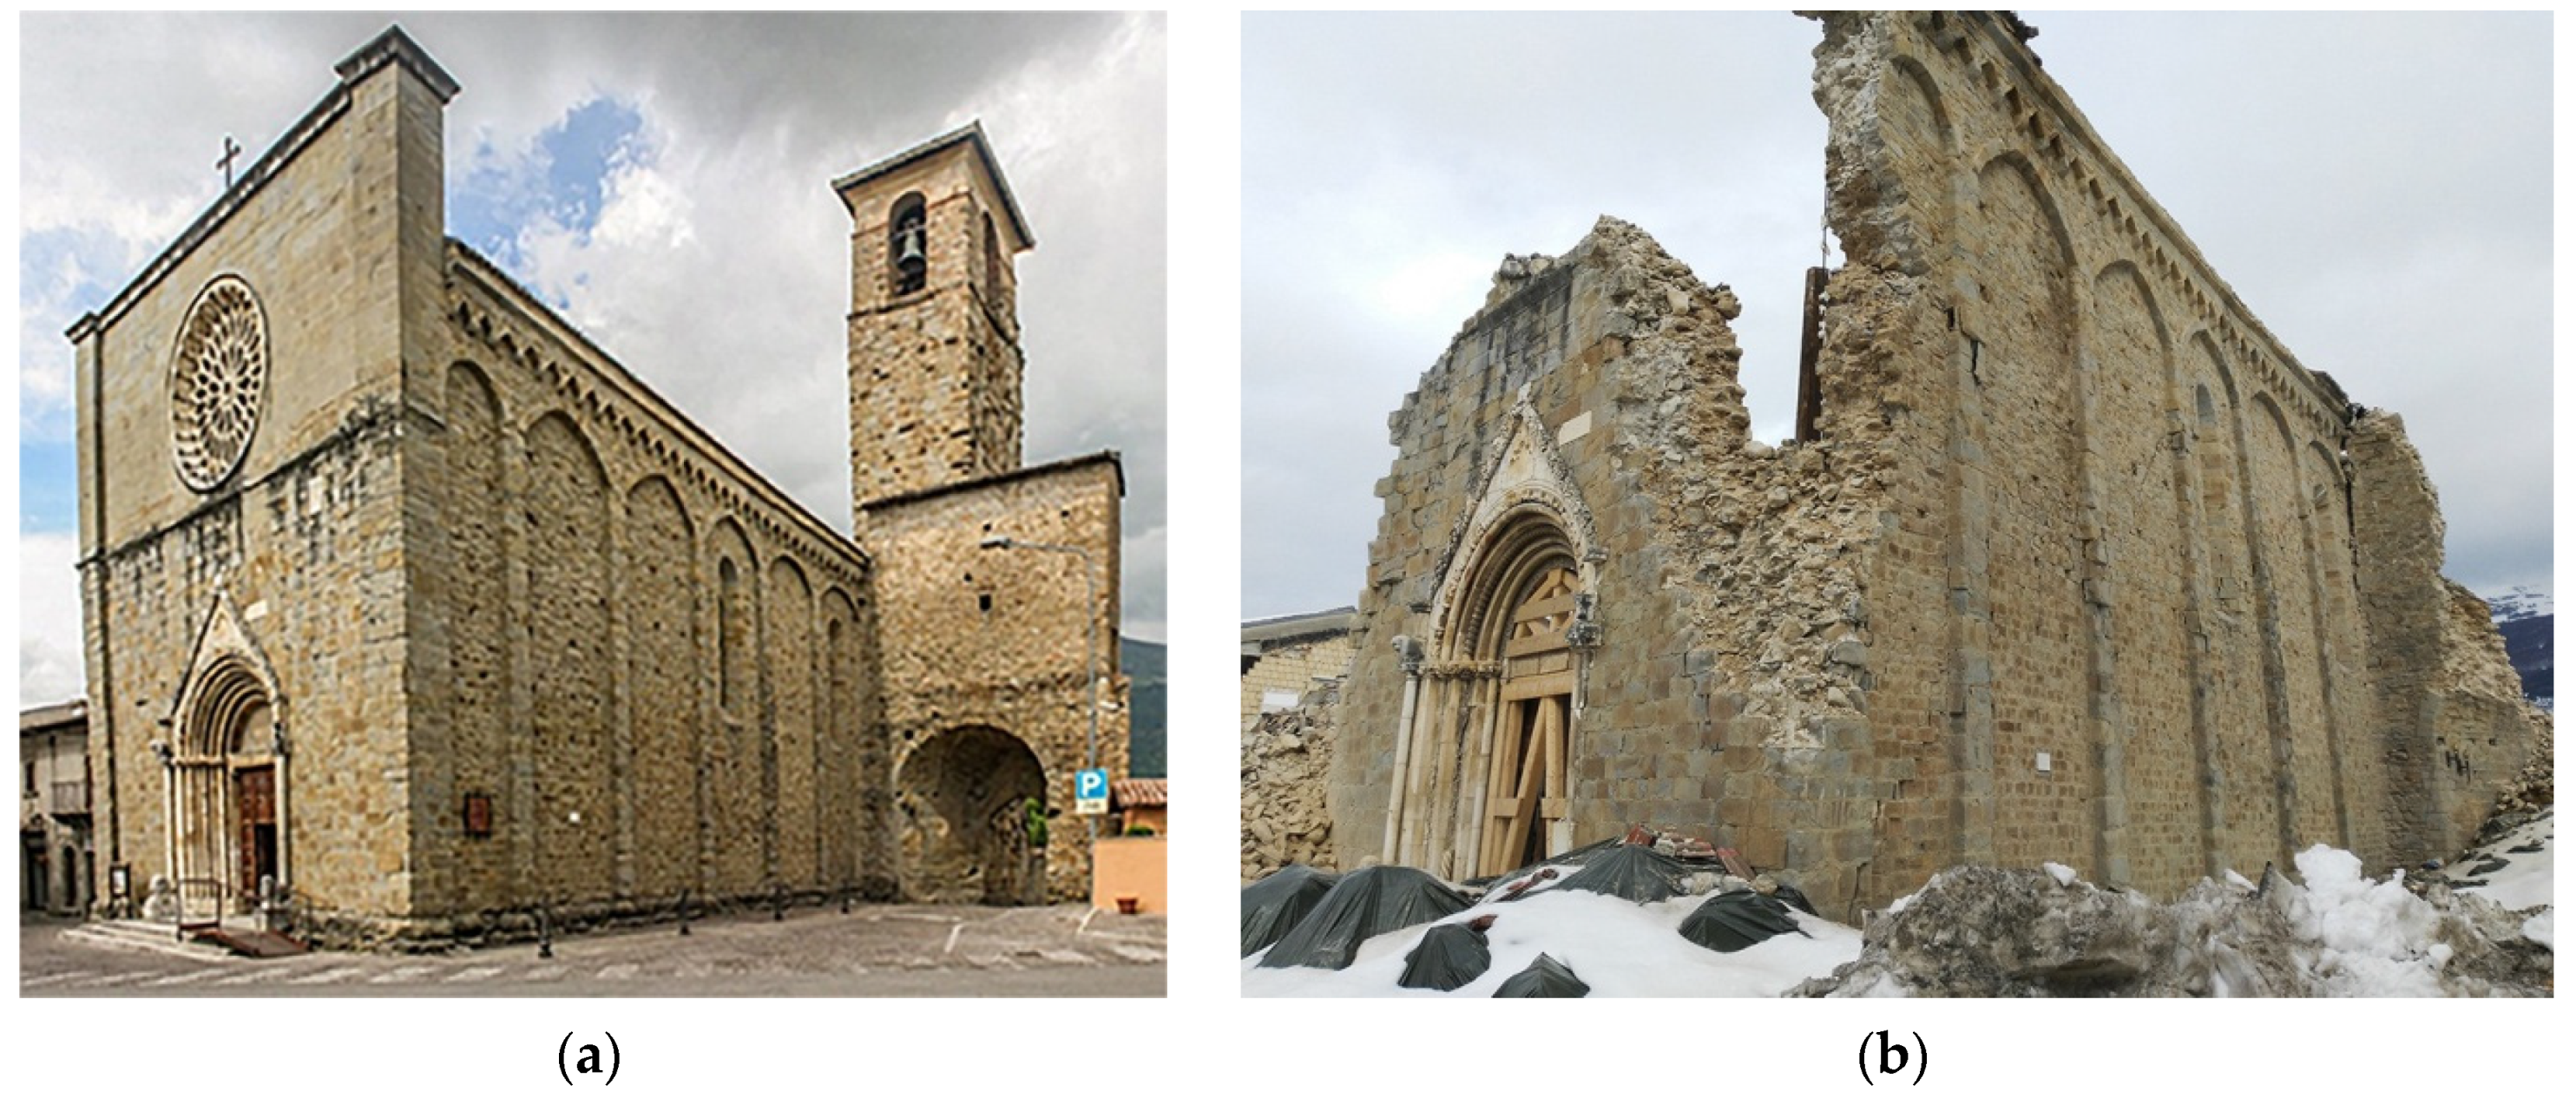 Applied Sciences | Free Full-Text | Mechanical Properties of Historic  Masonry Stones Obtained by In Situ Non-Destructive Tests on the St.  Agostino Church in Amatrice (Italy)